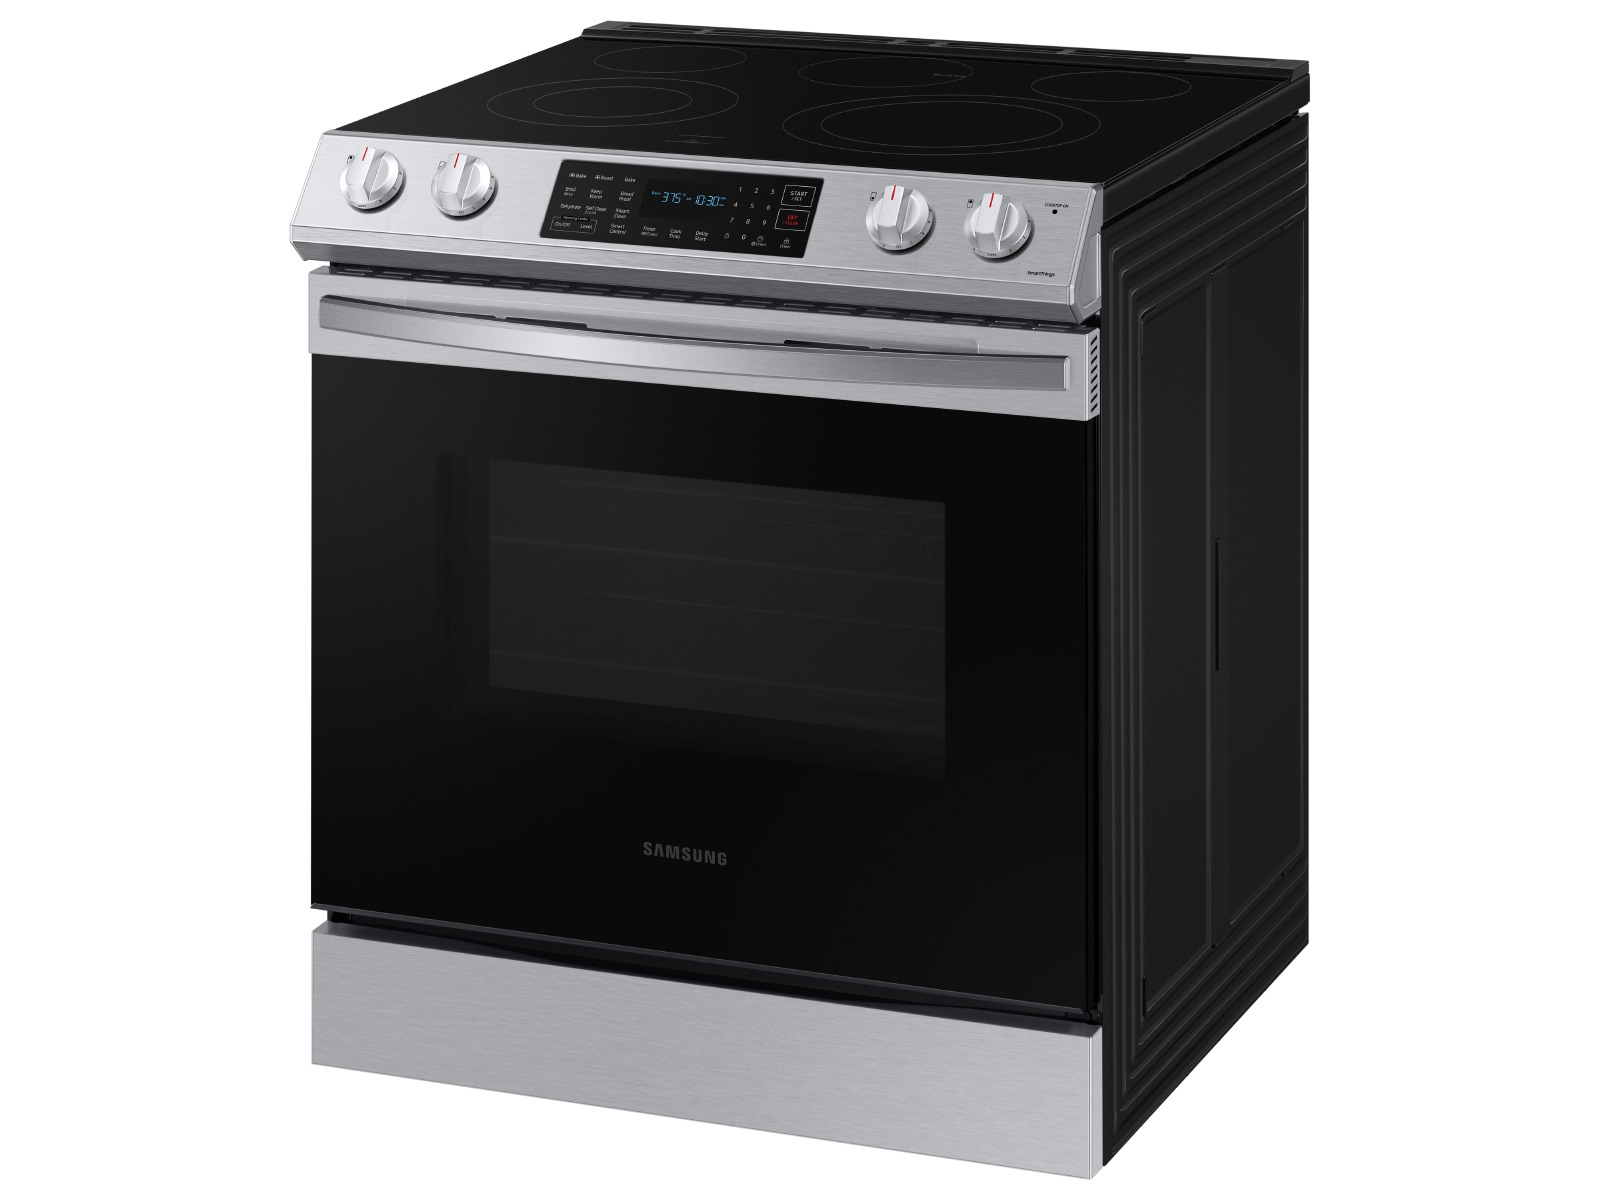 Samsung NE63T8311SG 6.3 Cu. Ft. Front Control Slide-In Electric Range With  Convection & Wi-Fi In Black Stainless Steel